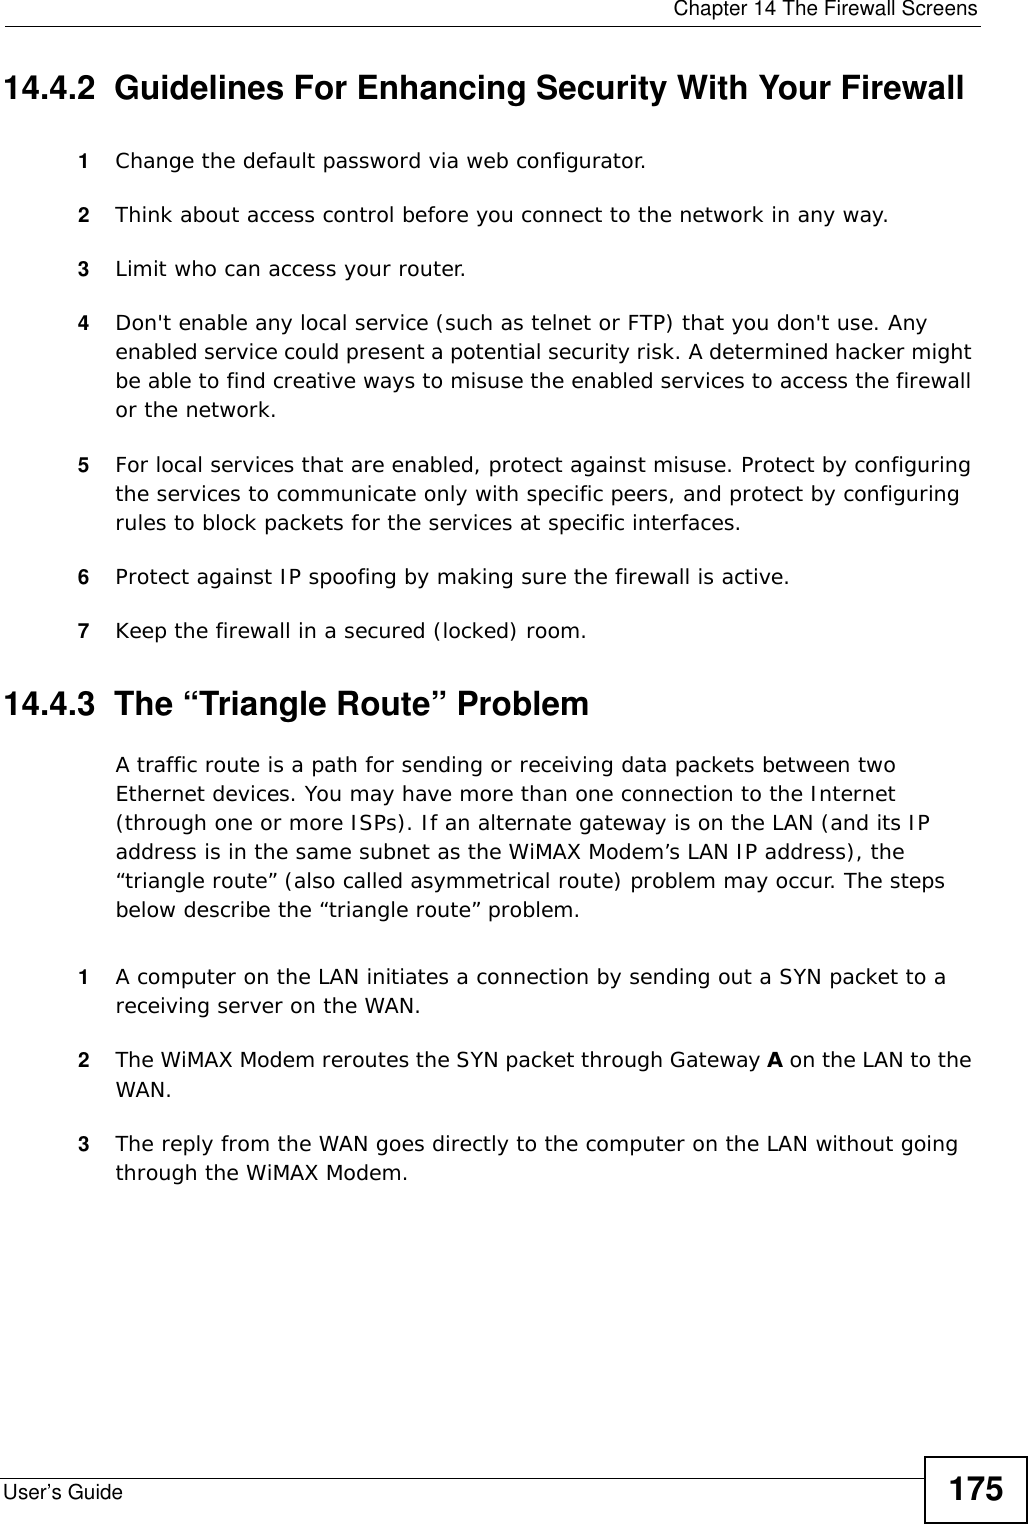  Chapter 14 The Firewall ScreensUser’s Guide 17514.4.2  Guidelines For Enhancing Security With Your Firewall1Change the default password via web configurator.2Think about access control before you connect to the network in any way.3Limit who can access your router.4Don&apos;t enable any local service (such as telnet or FTP) that you don&apos;t use. Any enabled service could present a potential security risk. A determined hacker might be able to find creative ways to misuse the enabled services to access the firewall or the network.5For local services that are enabled, protect against misuse. Protect by configuring the services to communicate only with specific peers, and protect by configuring rules to block packets for the services at specific interfaces.6Protect against IP spoofing by making sure the firewall is active.7Keep the firewall in a secured (locked) room.14.4.3  The “Triangle Route” ProblemA traffic route is a path for sending or receiving data packets between two Ethernet devices. You may have more than one connection to the Internet (through one or more ISPs). If an alternate gateway is on the LAN (and its IP address is in the same subnet as the WiMAX Modem’s LAN IP address), the “triangle route” (also called asymmetrical route) problem may occur. The steps below describe the “triangle route” problem. 1A computer on the LAN initiates a connection by sending out a SYN packet to a receiving server on the WAN.2The WiMAX Modem reroutes the SYN packet through Gateway A on the LAN to the WAN. 3The reply from the WAN goes directly to the computer on the LAN without going through the WiMAX Modem. 